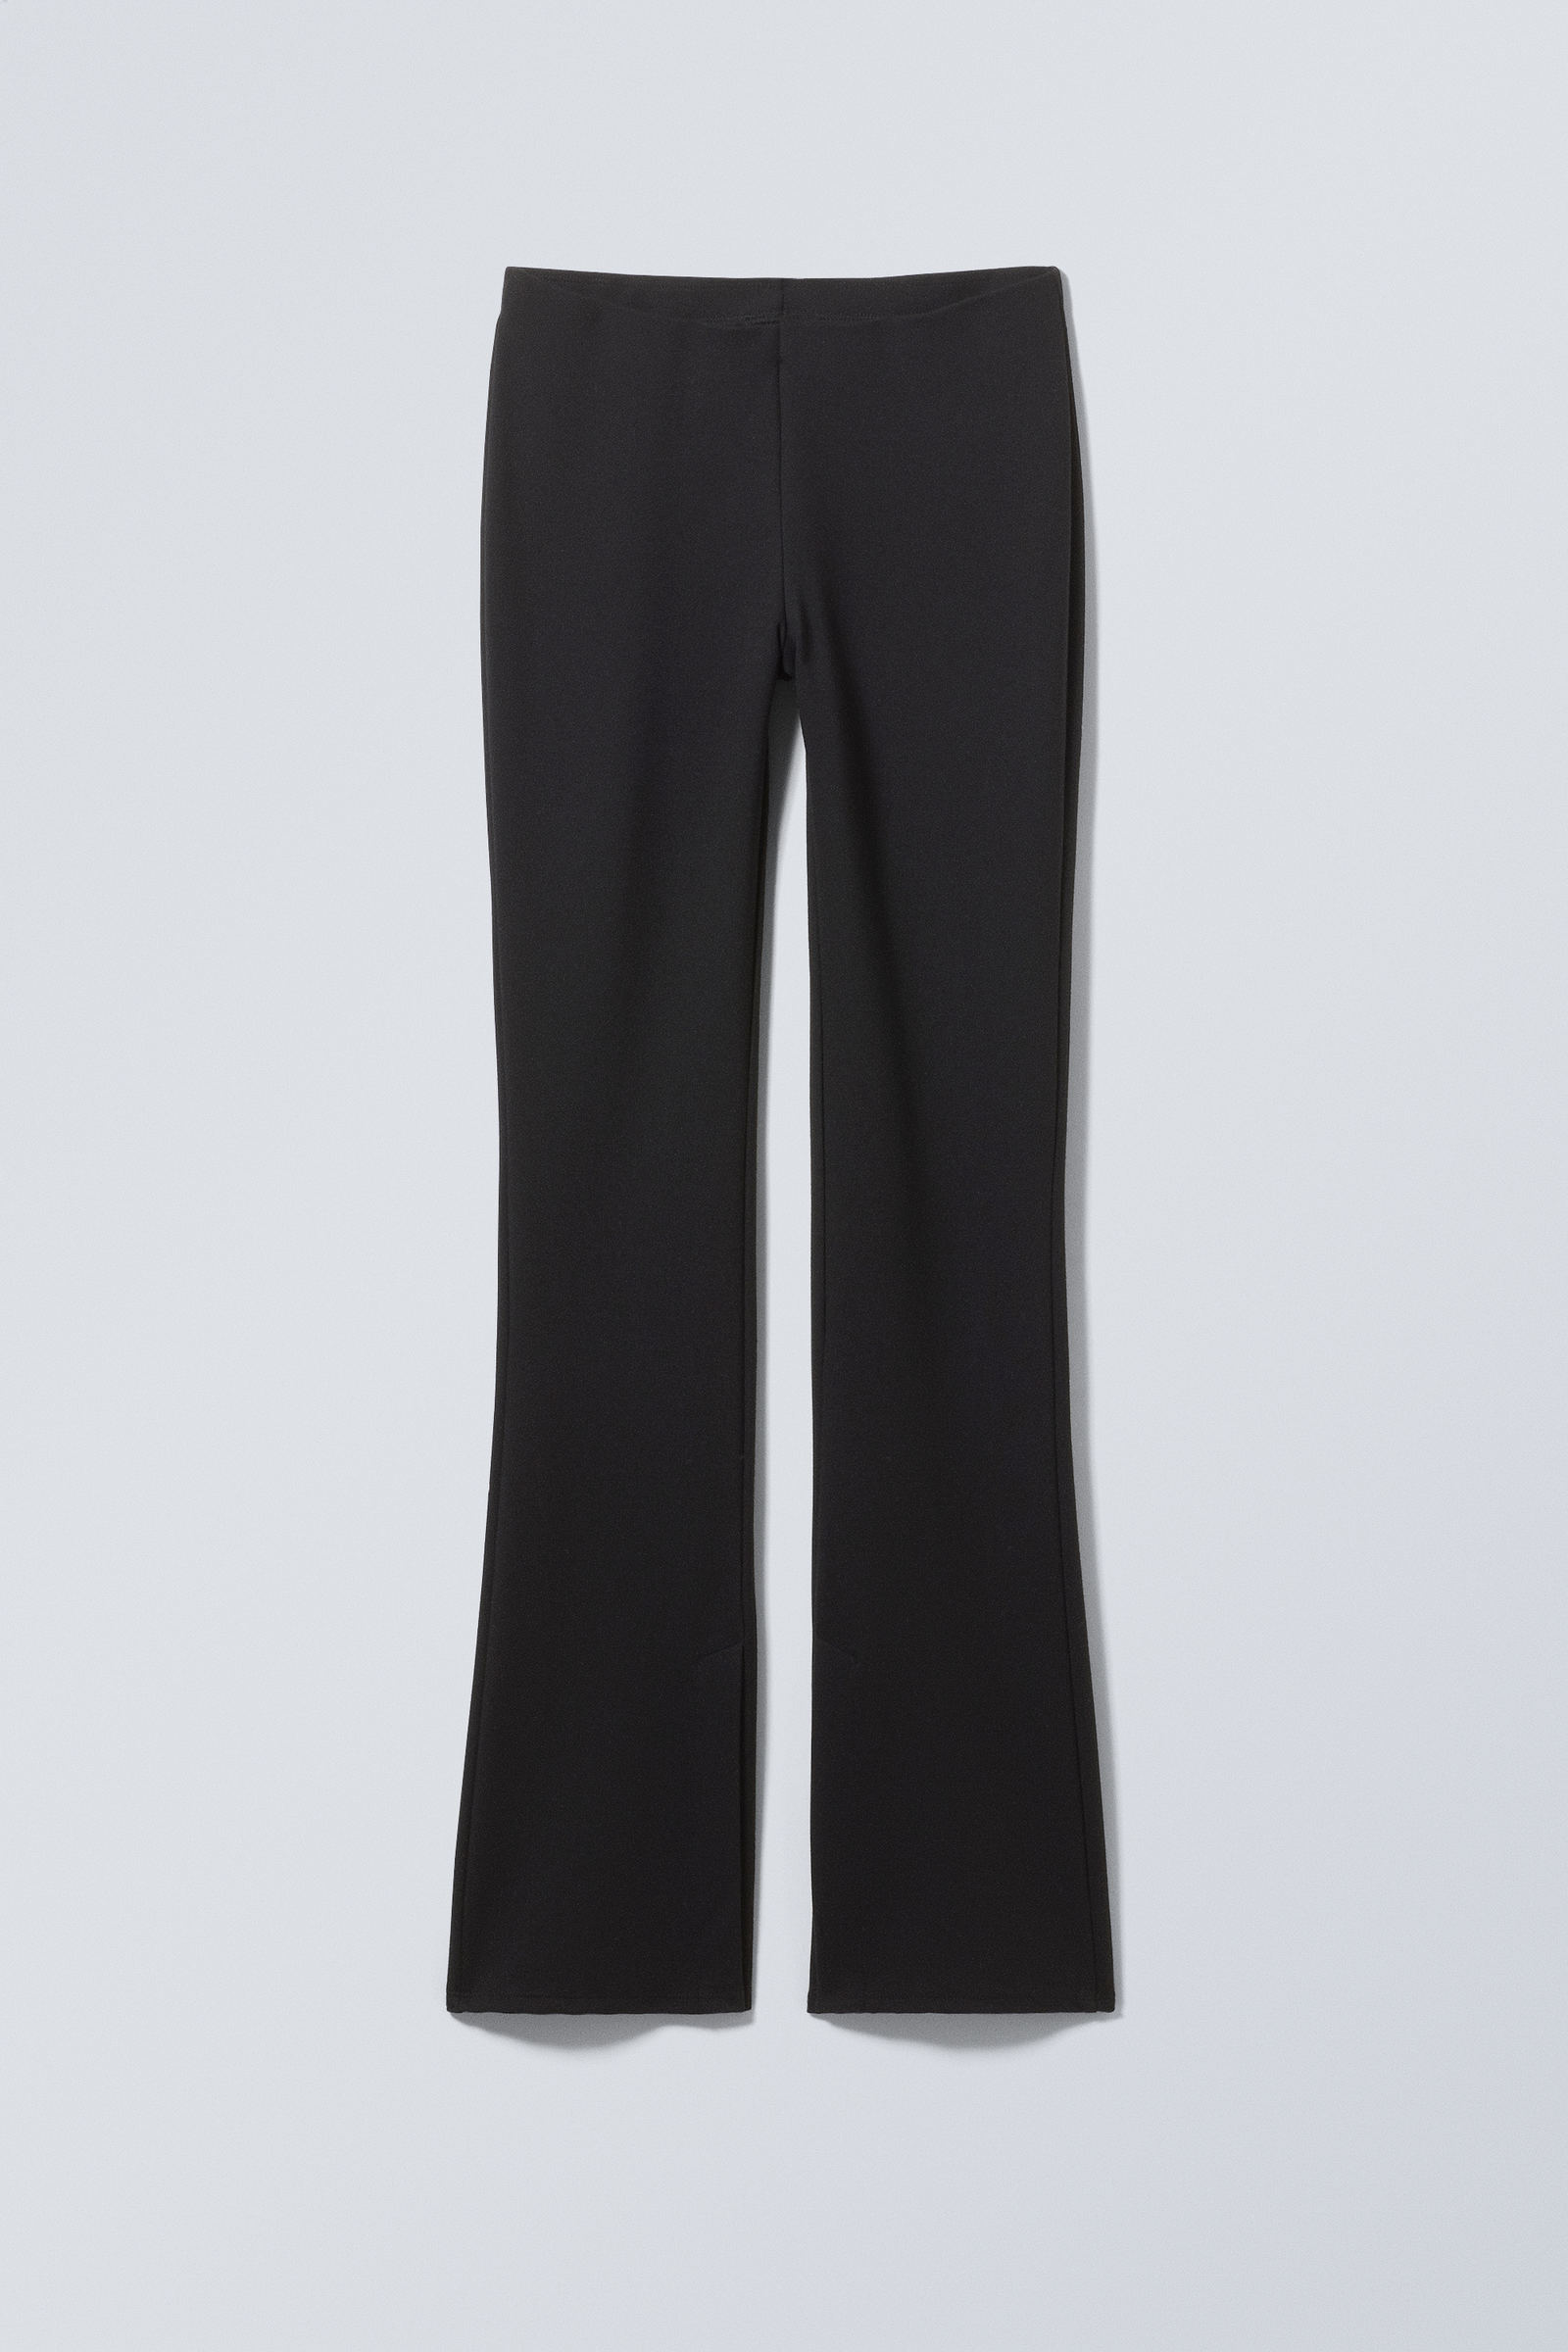 #272628 - Philo Flared Jersey Trousers - 1